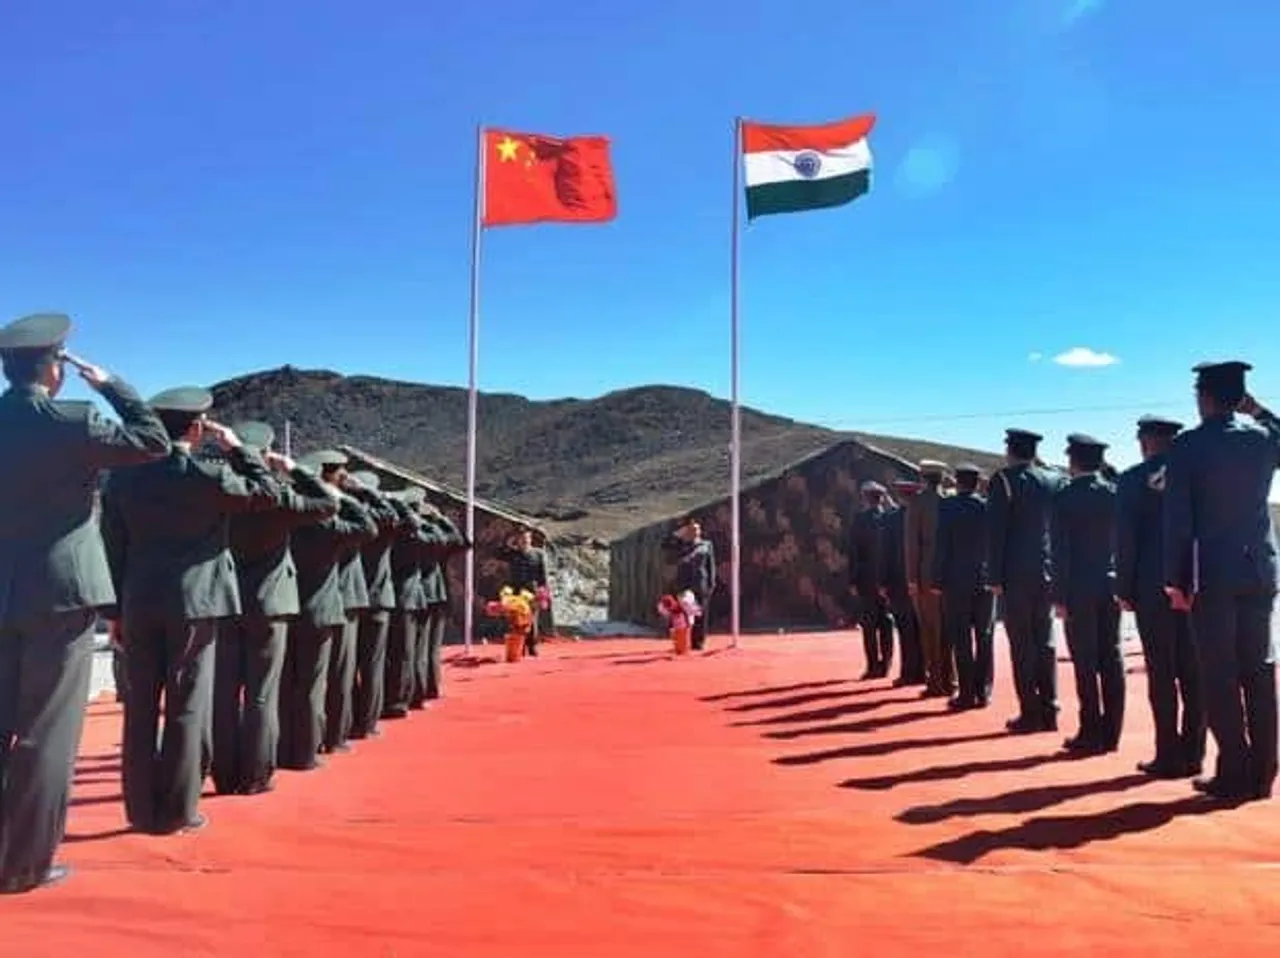 India China standoff: India's relations with China in worst phase ever